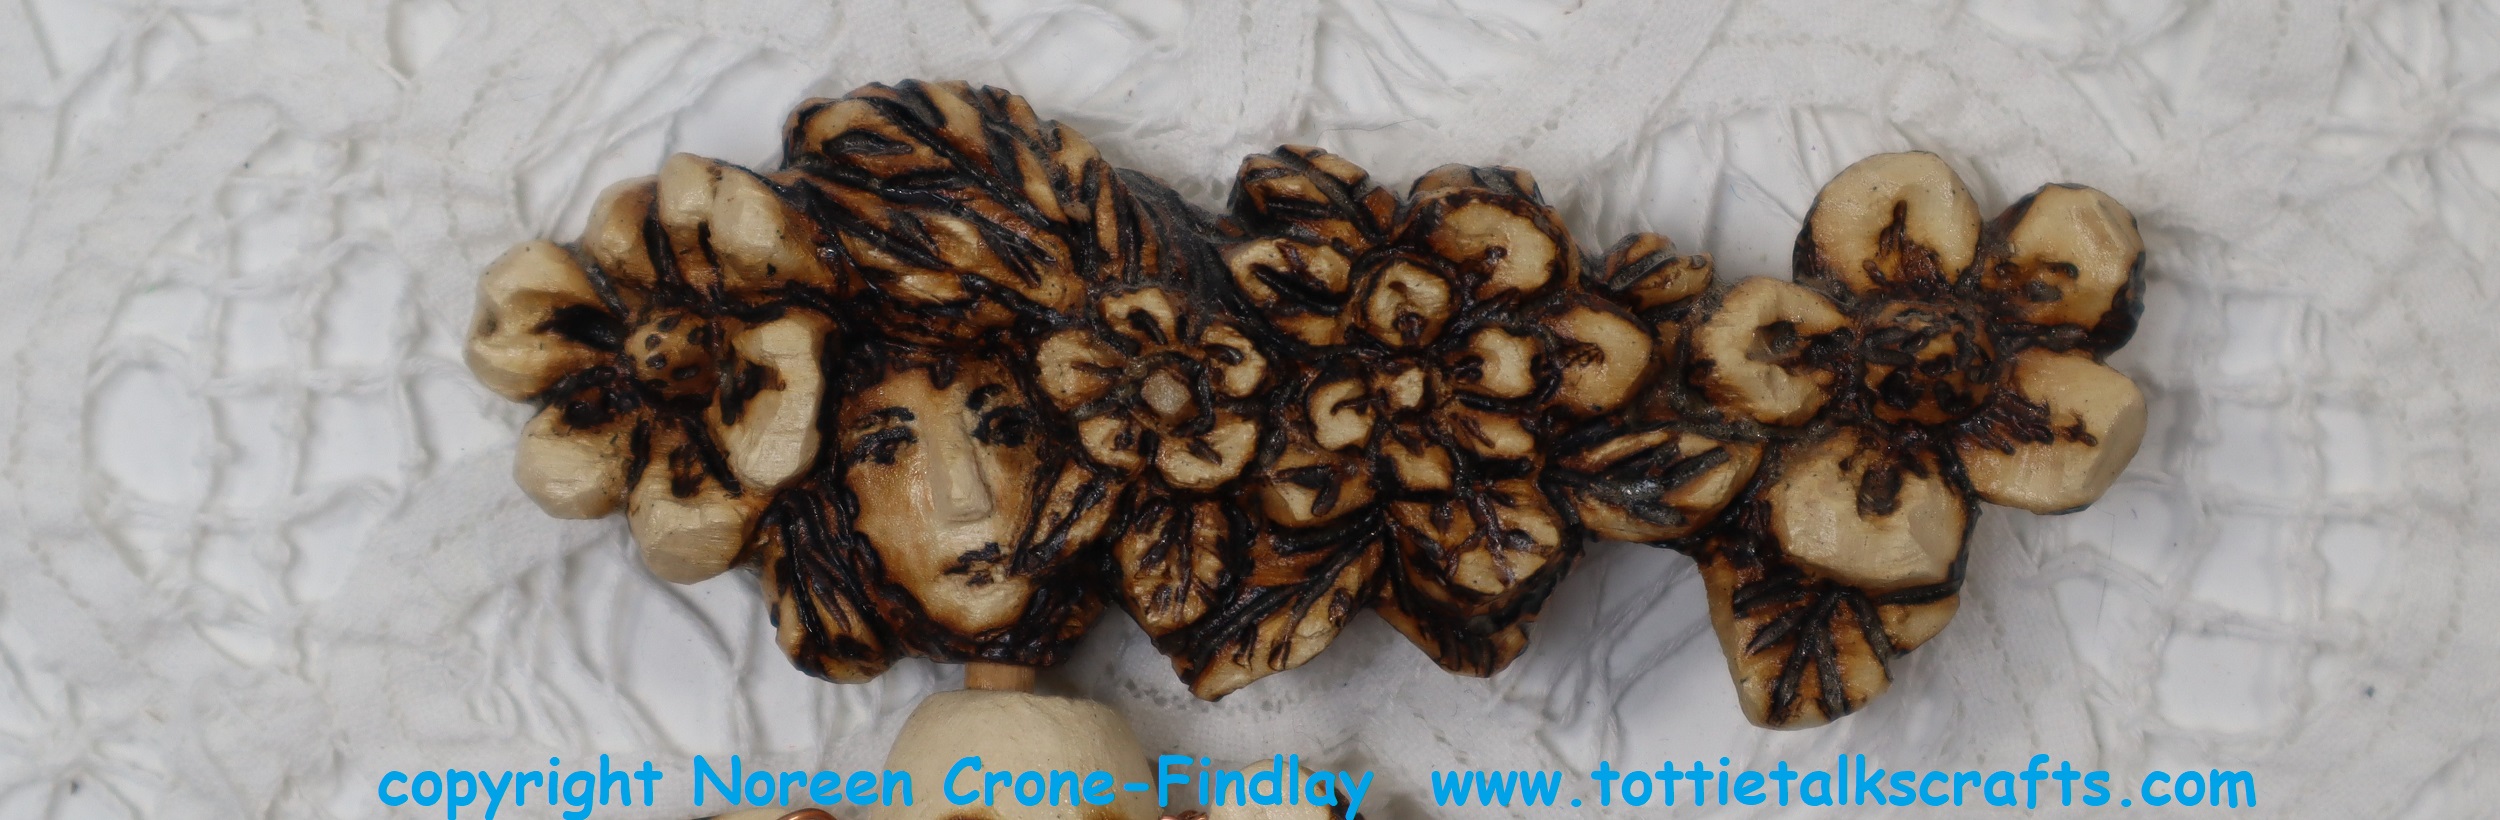 One of a Kind Hand Carved Wooden Sculptural Spoons that I am selling